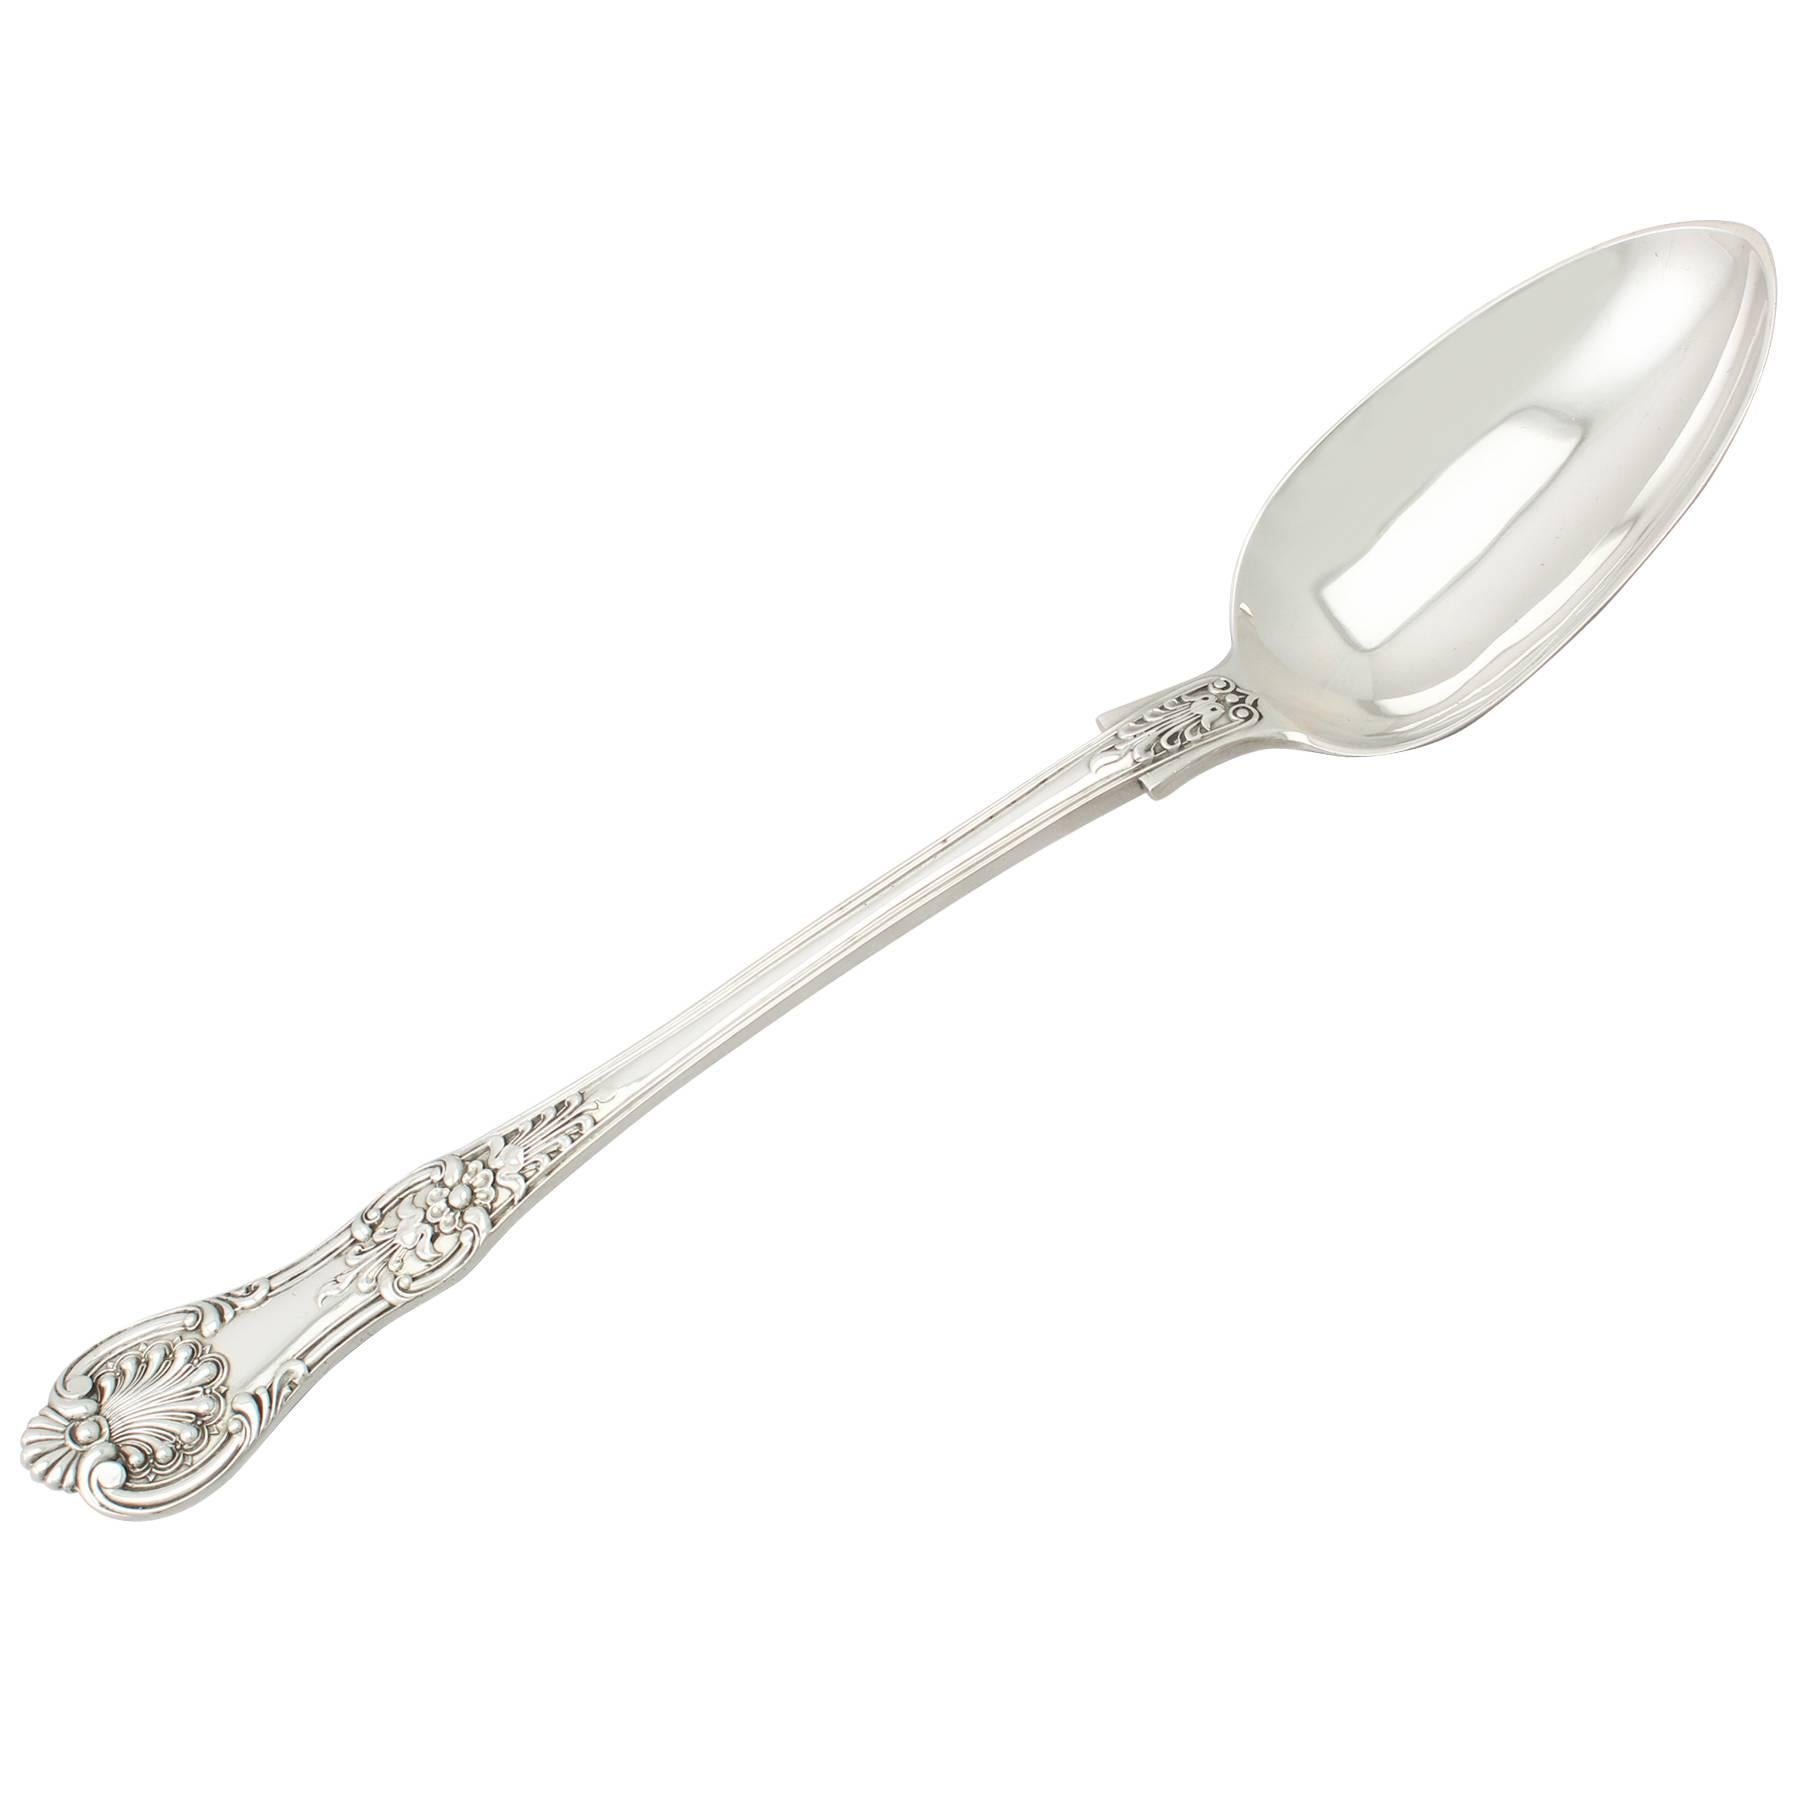 Sterling Silver Queen's Pattern Gravy Spoon by George Adams, Antique Victorian